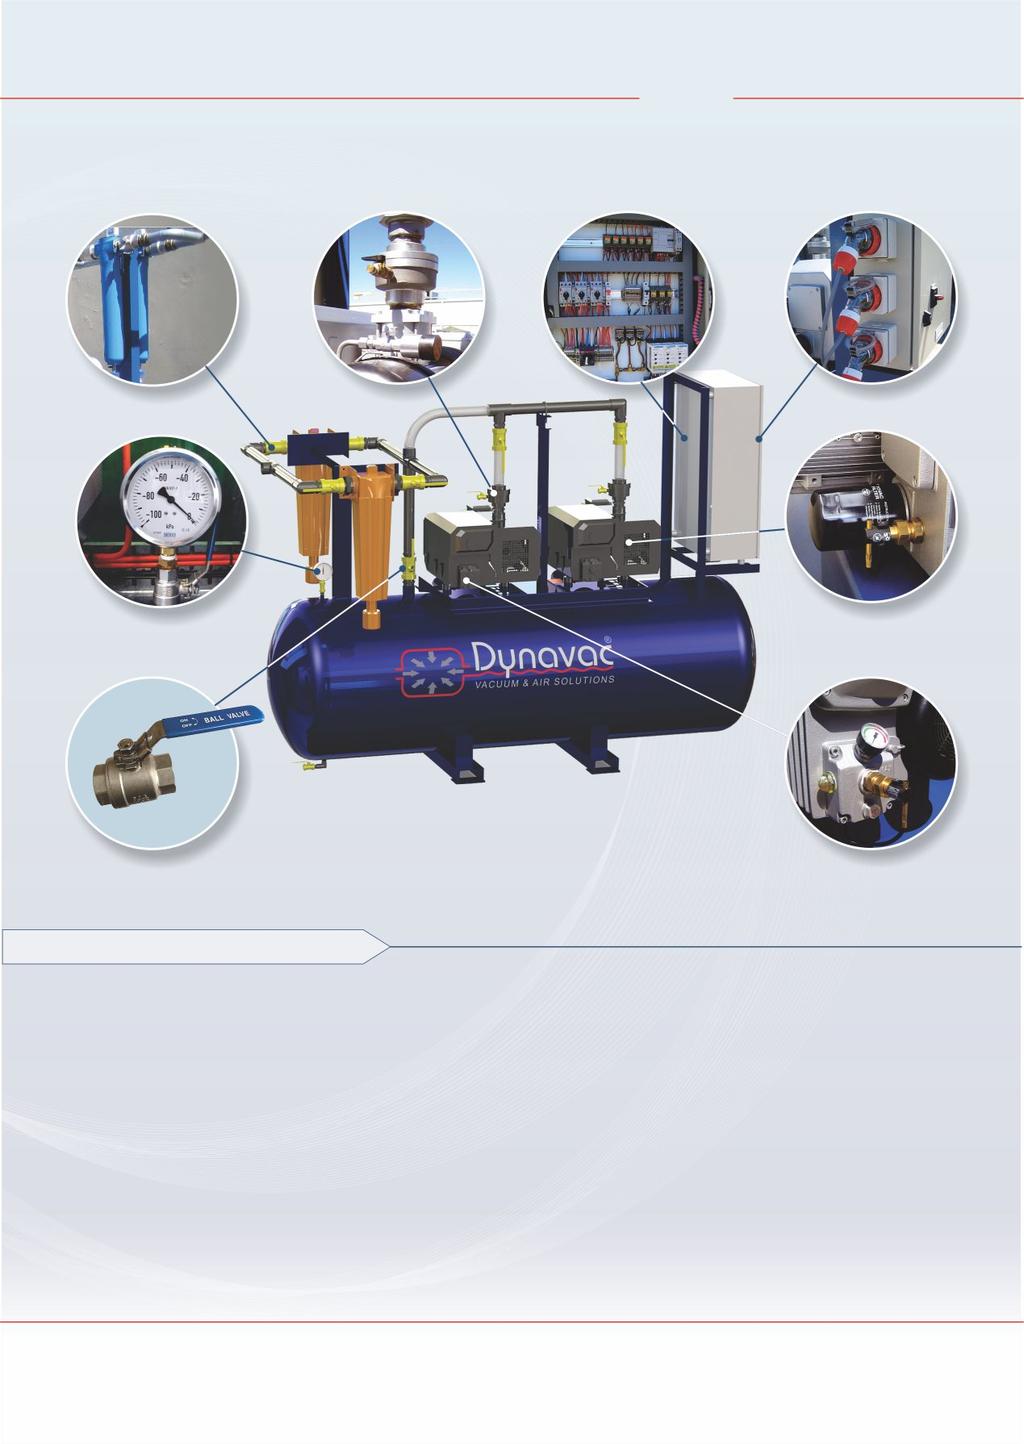 Central Vacuum Systems Features Manufactured and Tested in Australia to AS 2896.